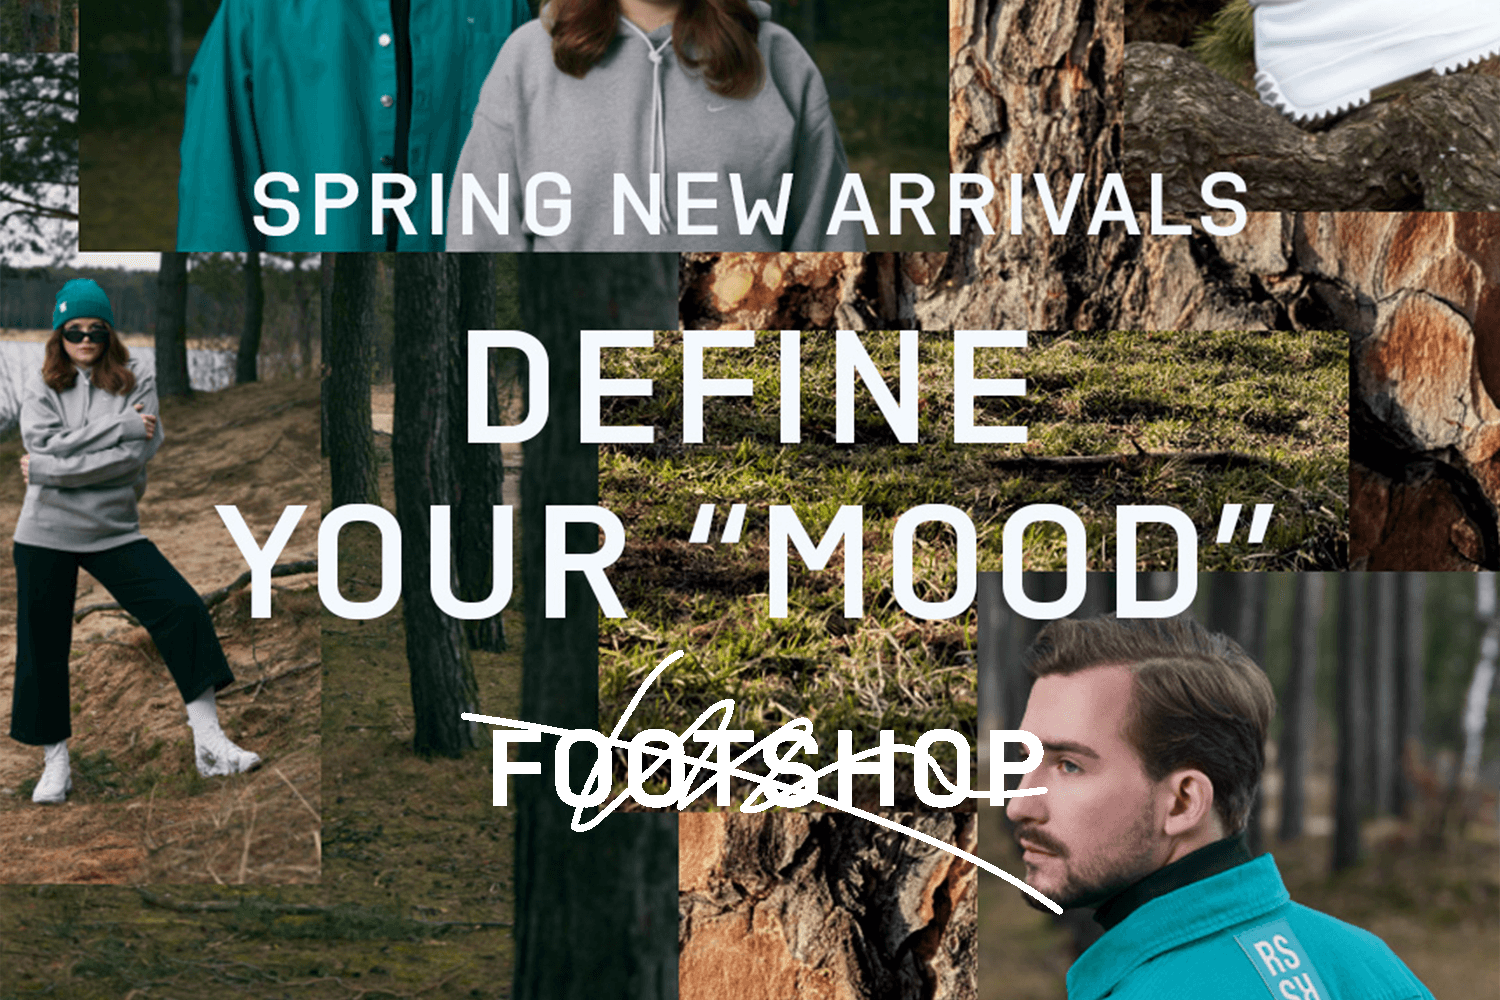 Our favourite new arrivals at Footshop for spring